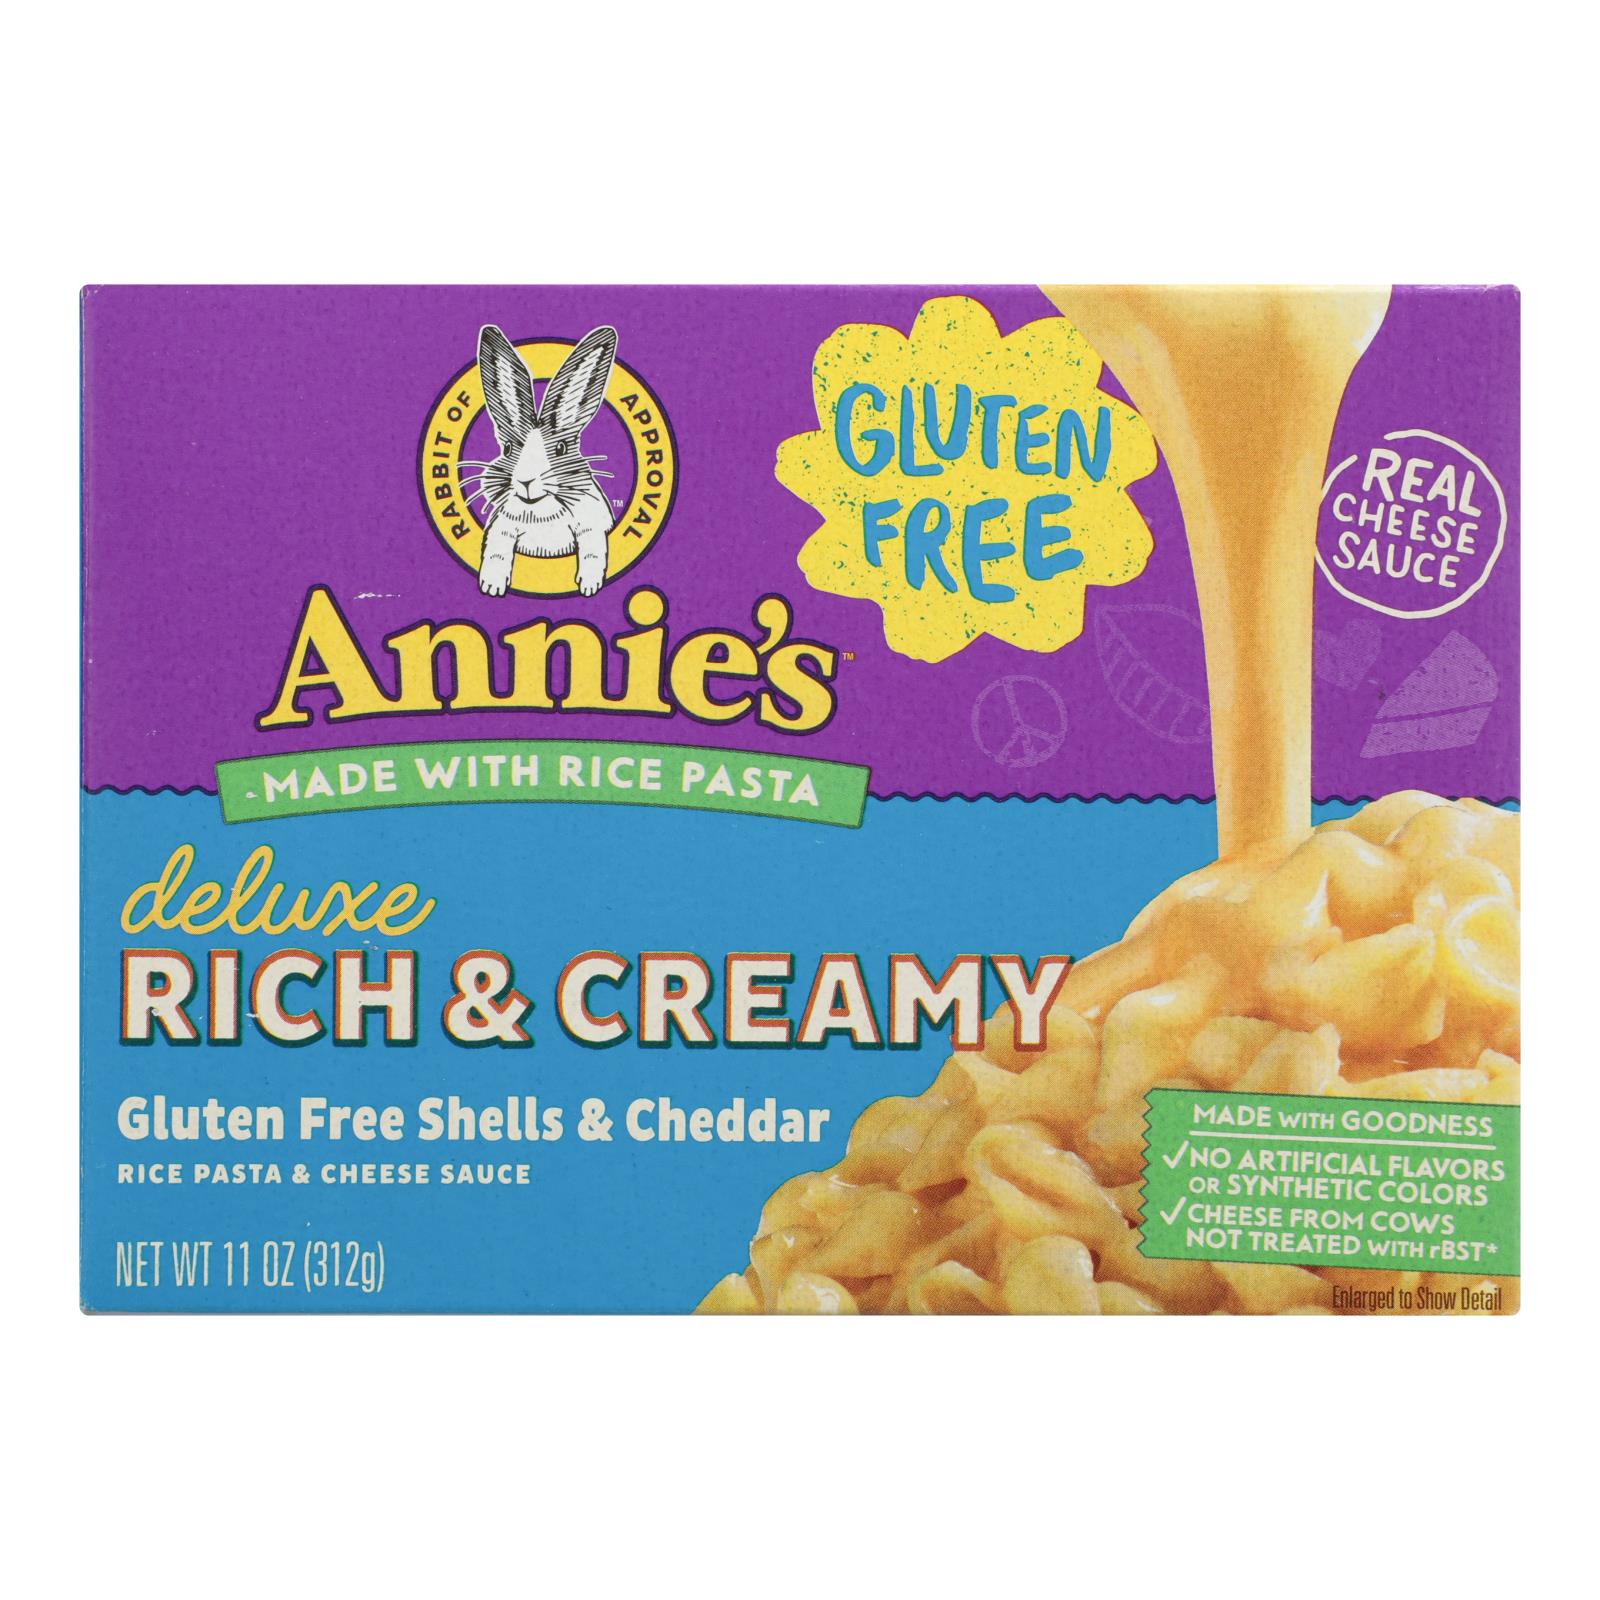 Annies Homegrown Rice Pasta Dinner - Creamy Deluxe - Rice Pasta And Extra Cheesy Cheddar Sauce - Gluten Free - 11 Oz - Case Of 12